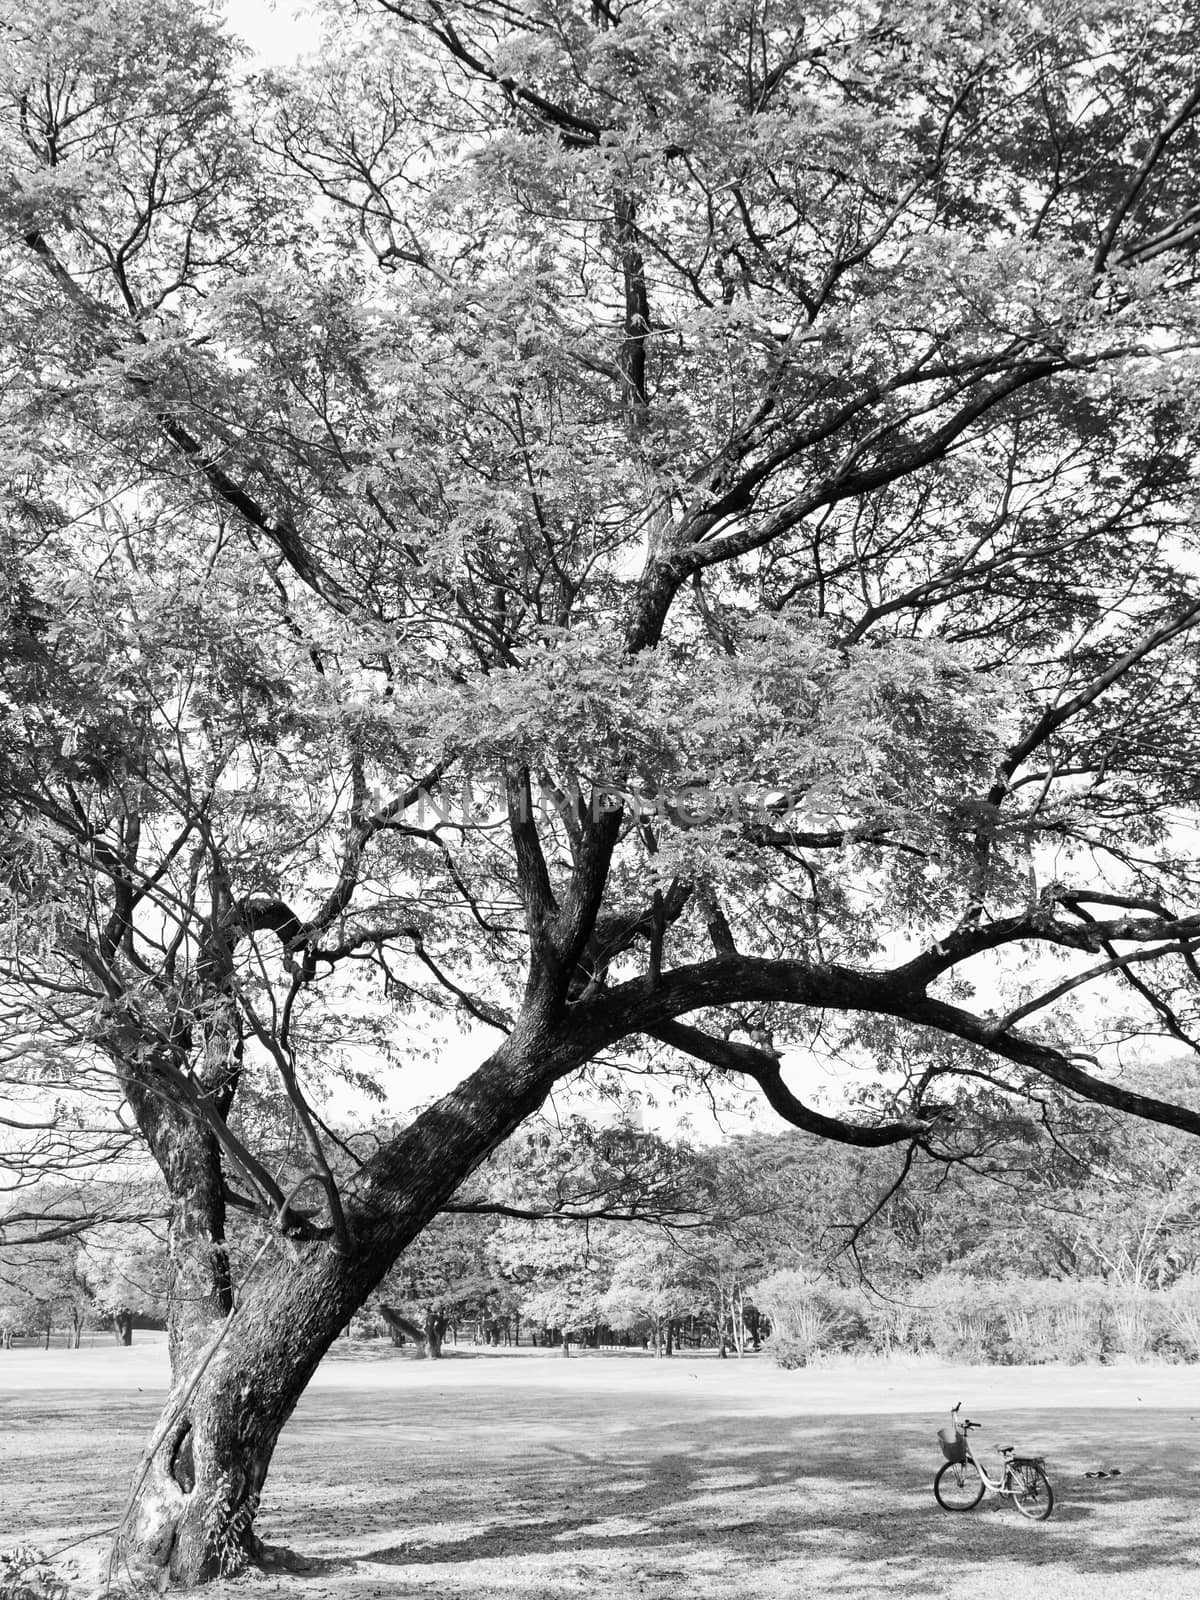 Black and white landscape image of Big tree with a bicycle in the park by ronnarong